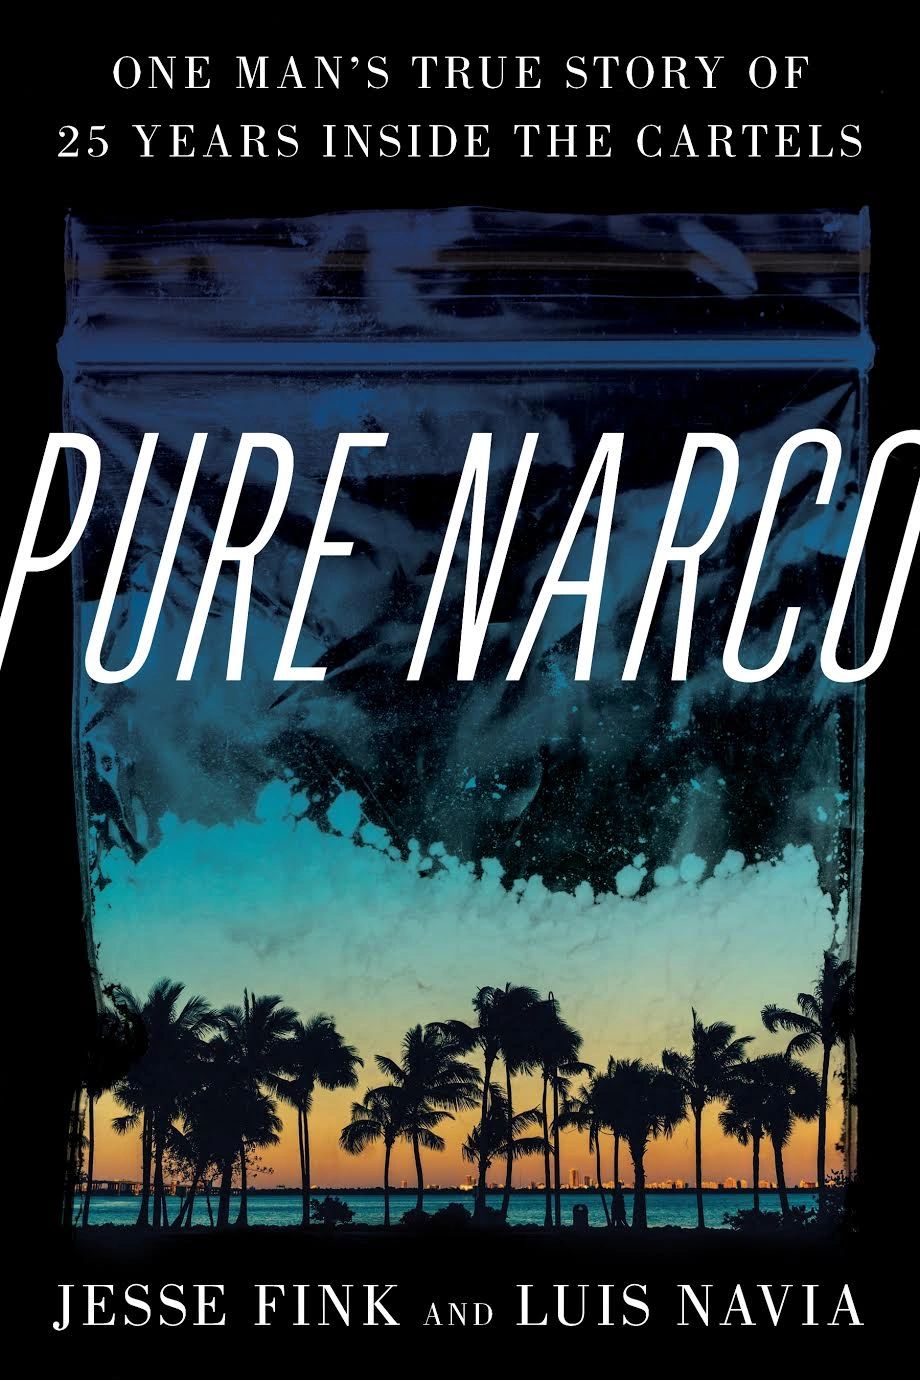 USA cover of PURE NARCO